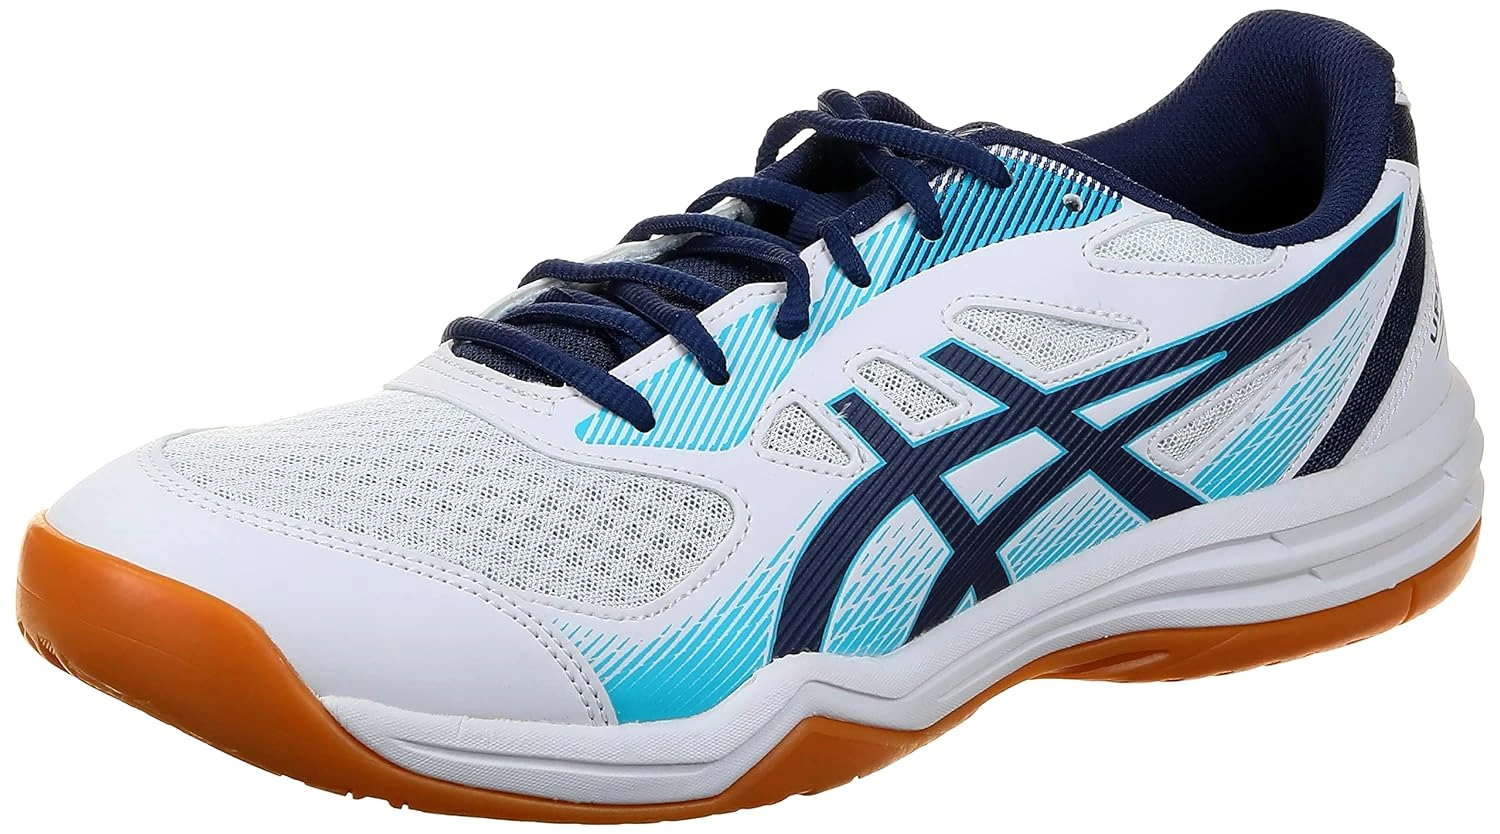 ASICS Upcourt 5 Men's Badminton Shoes: Lightweight, Flexible Badminton Trainers for Optimal Performance on the Court-52370